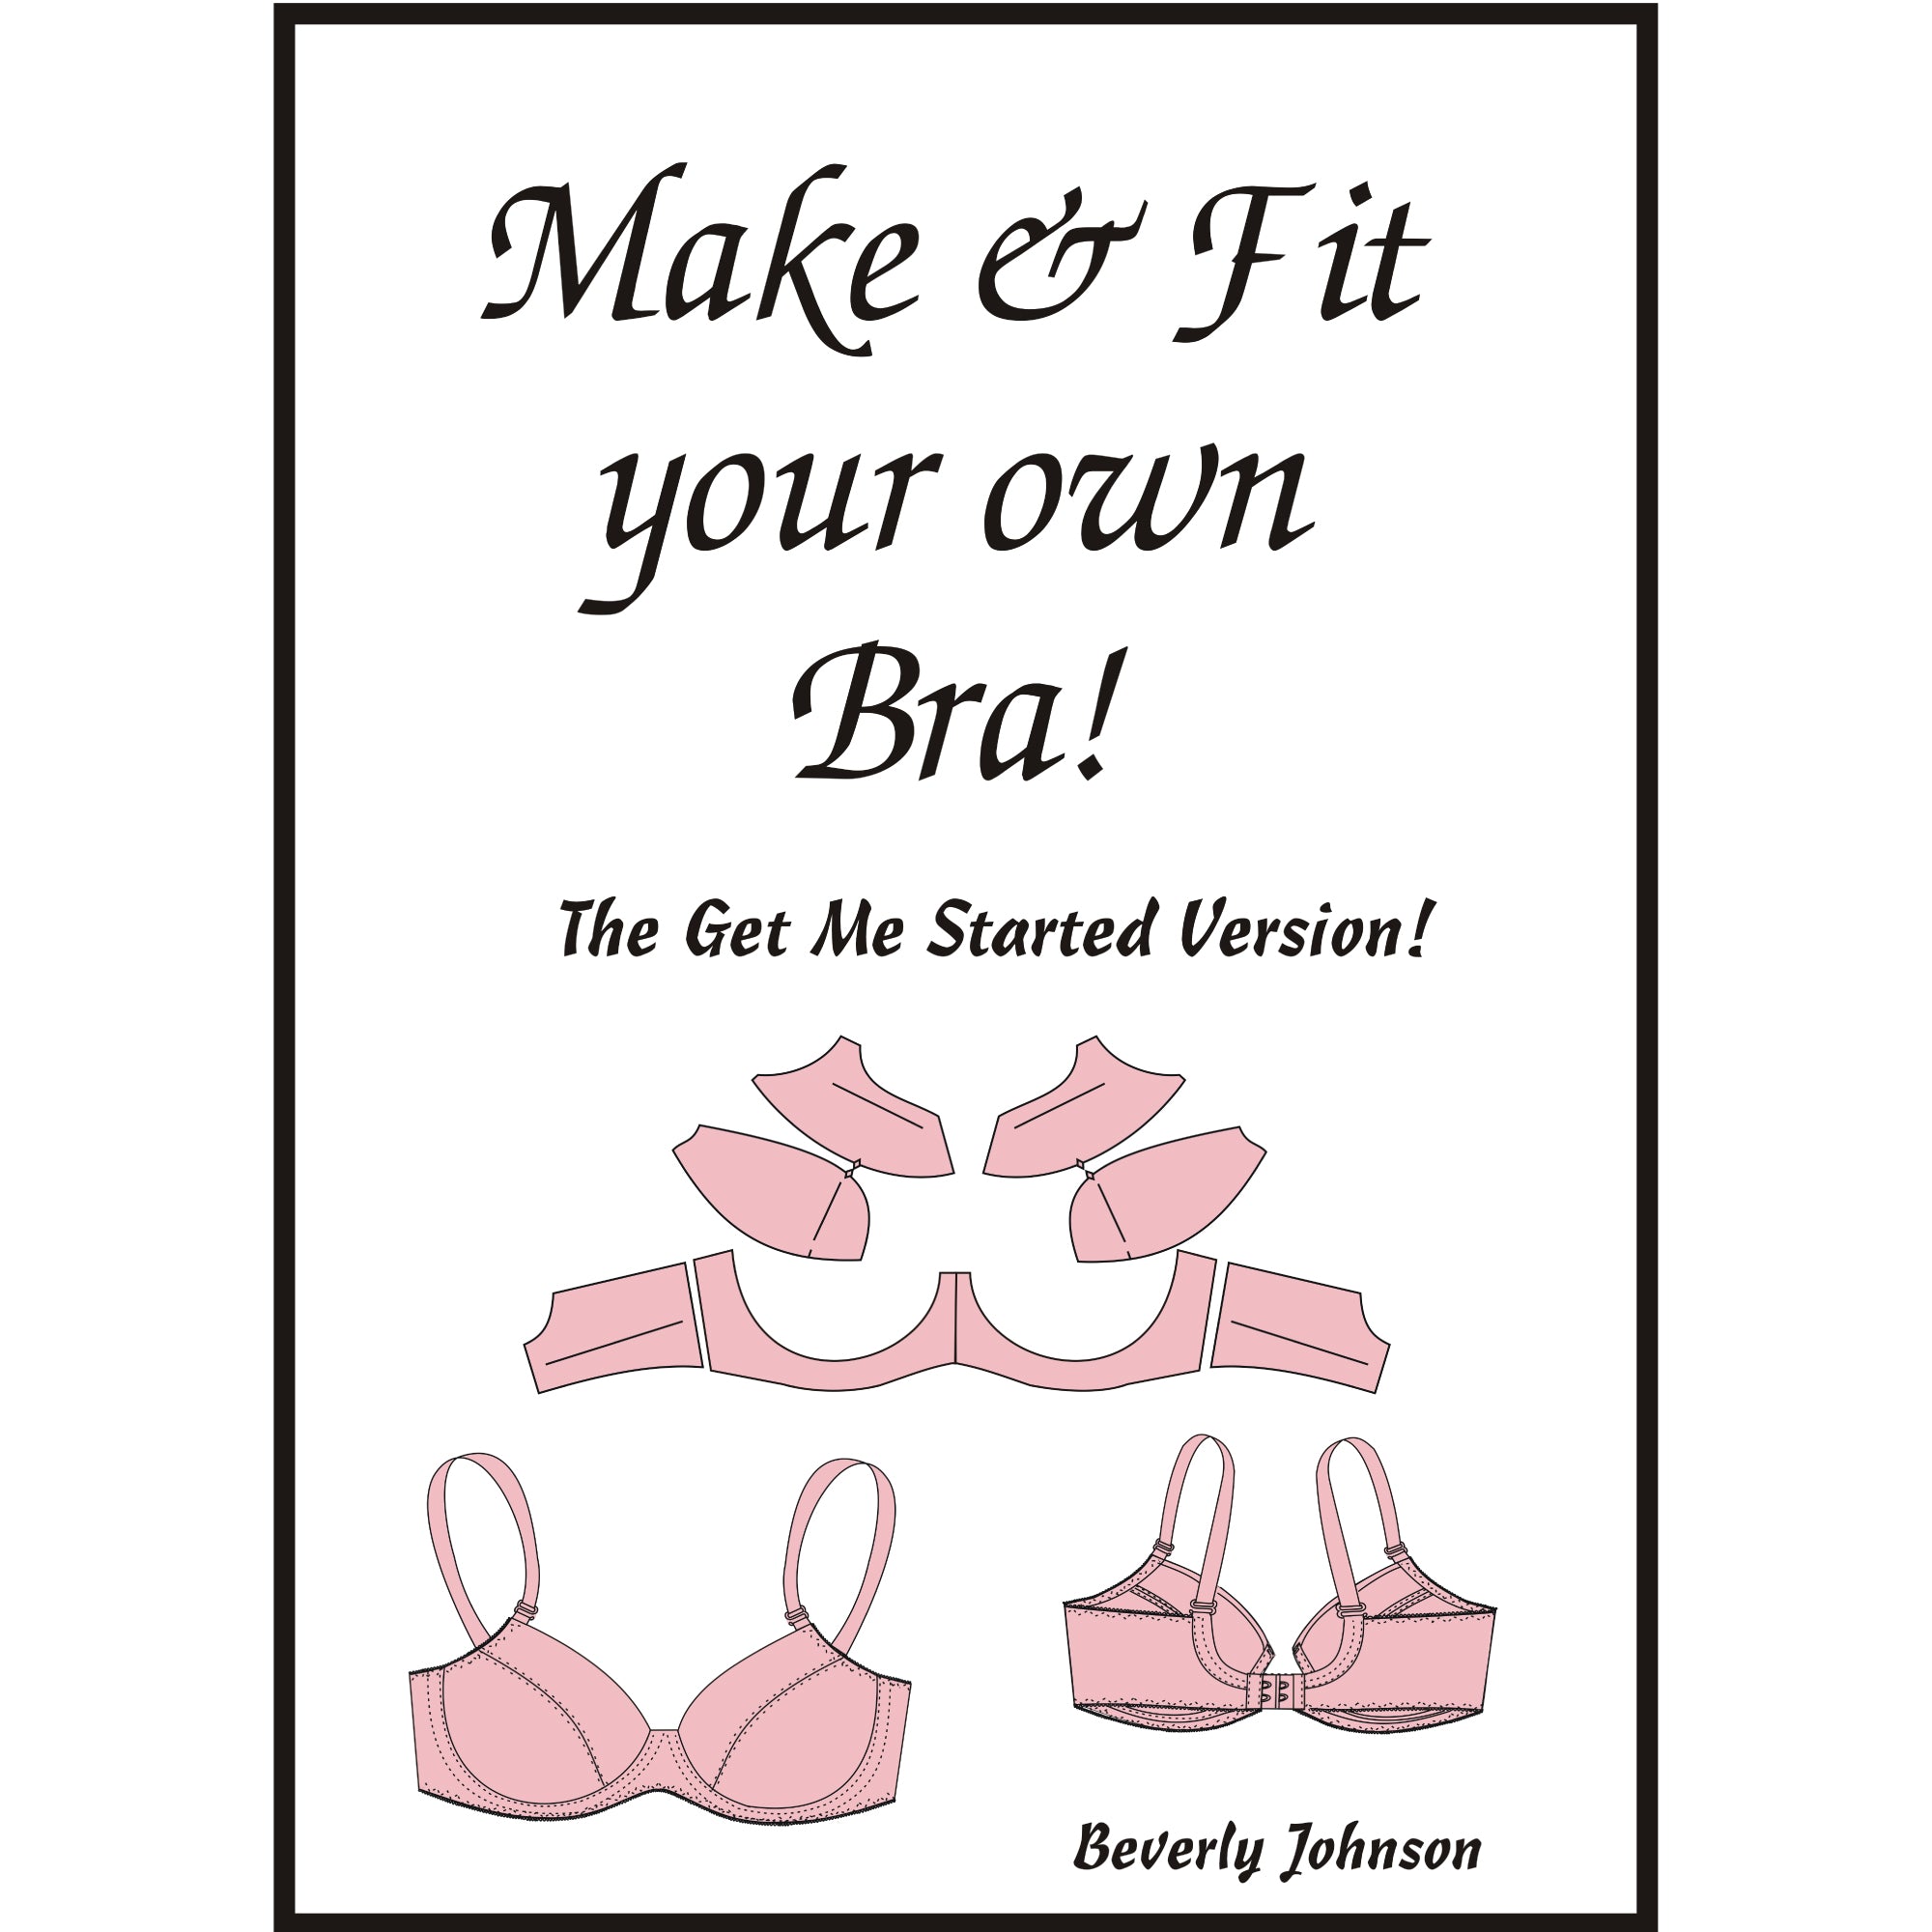 Sew Simple Bralettes - book and pattern by Beverly Johnson and